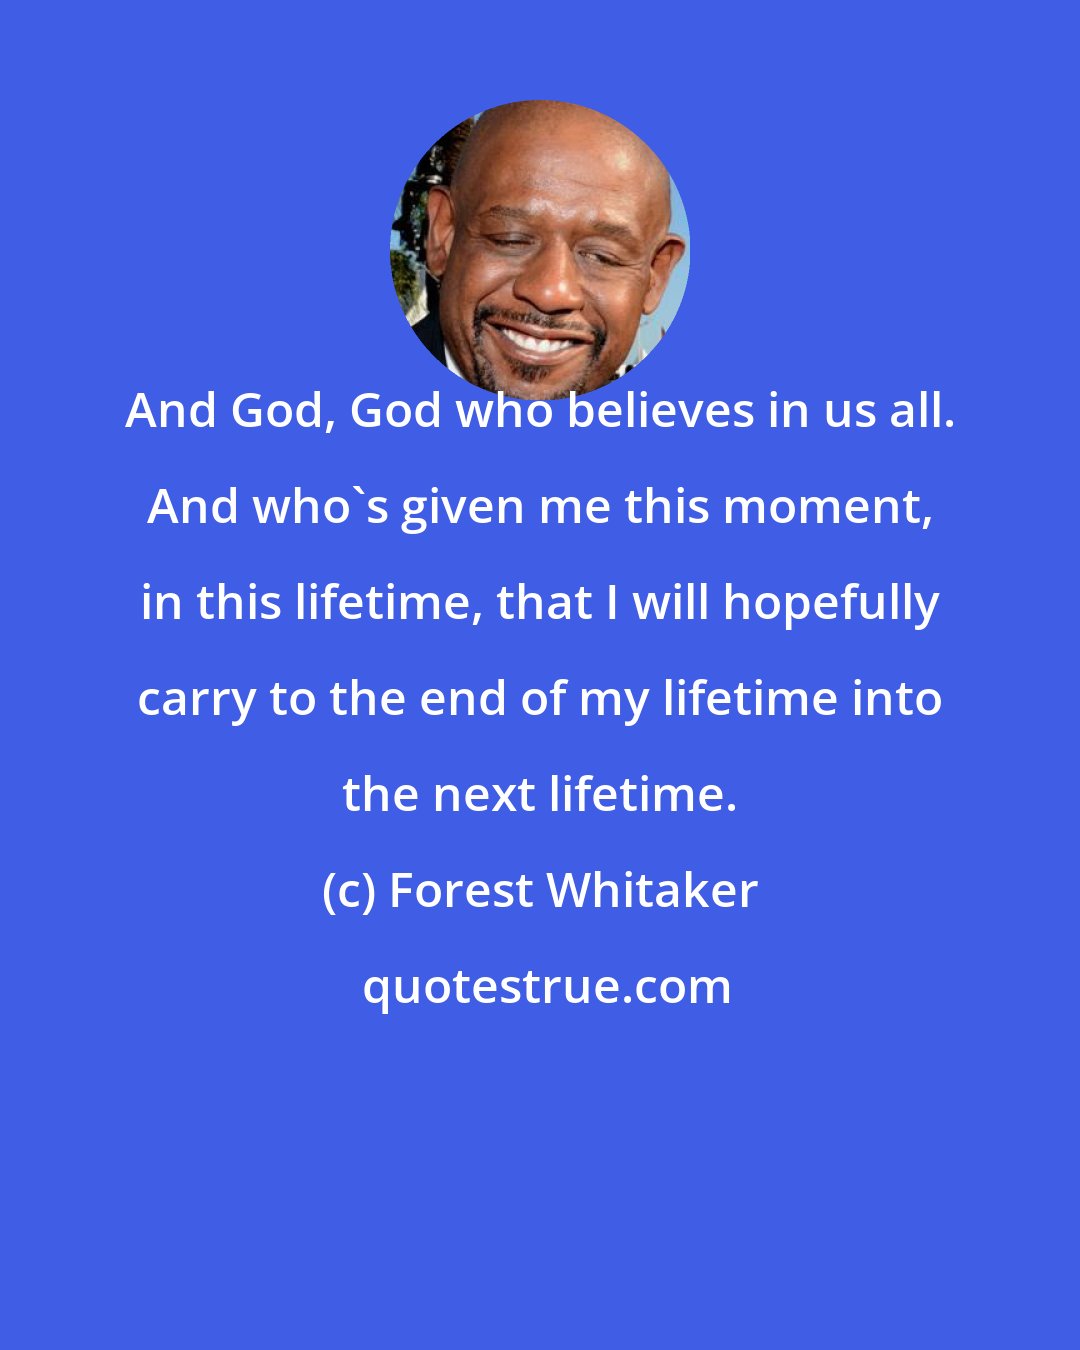 Forest Whitaker: And God, God who believes in us all. And who's given me this moment, in this lifetime, that I will hopefully carry to the end of my lifetime into the next lifetime.